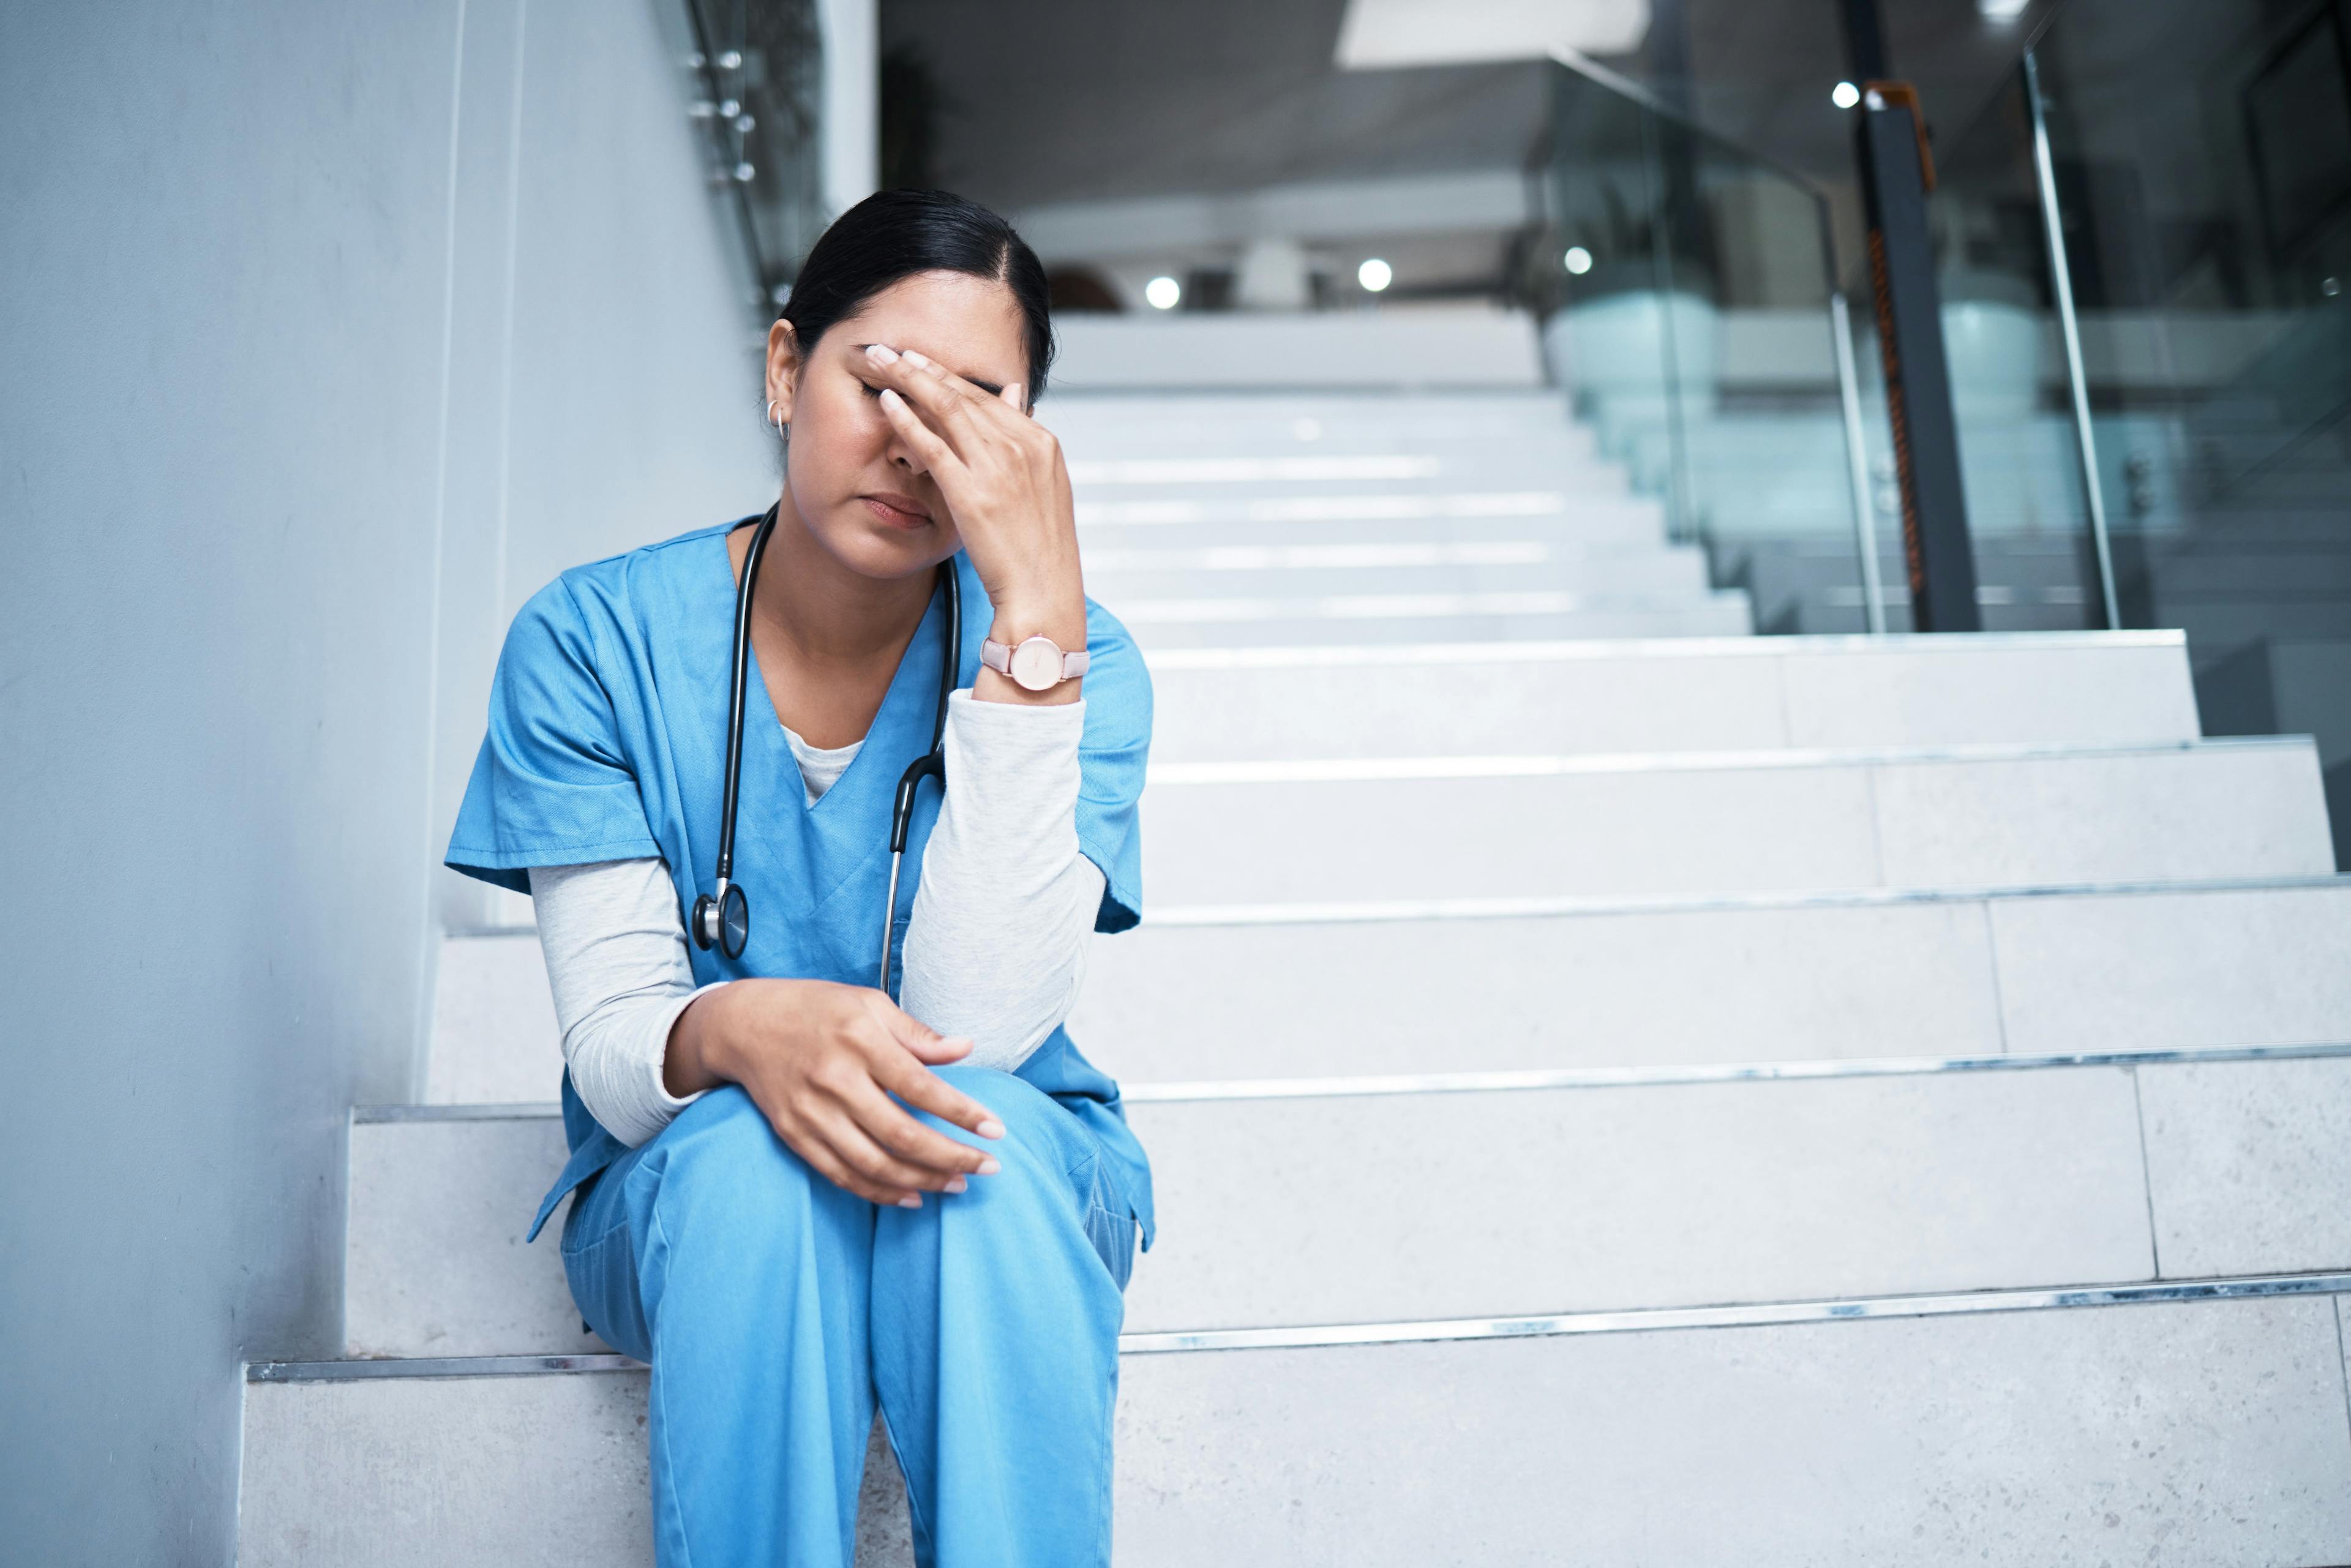 Here’s how providing tailored mental health support for health care professionals can help alleviate burnout and other mental health challenges within health care.